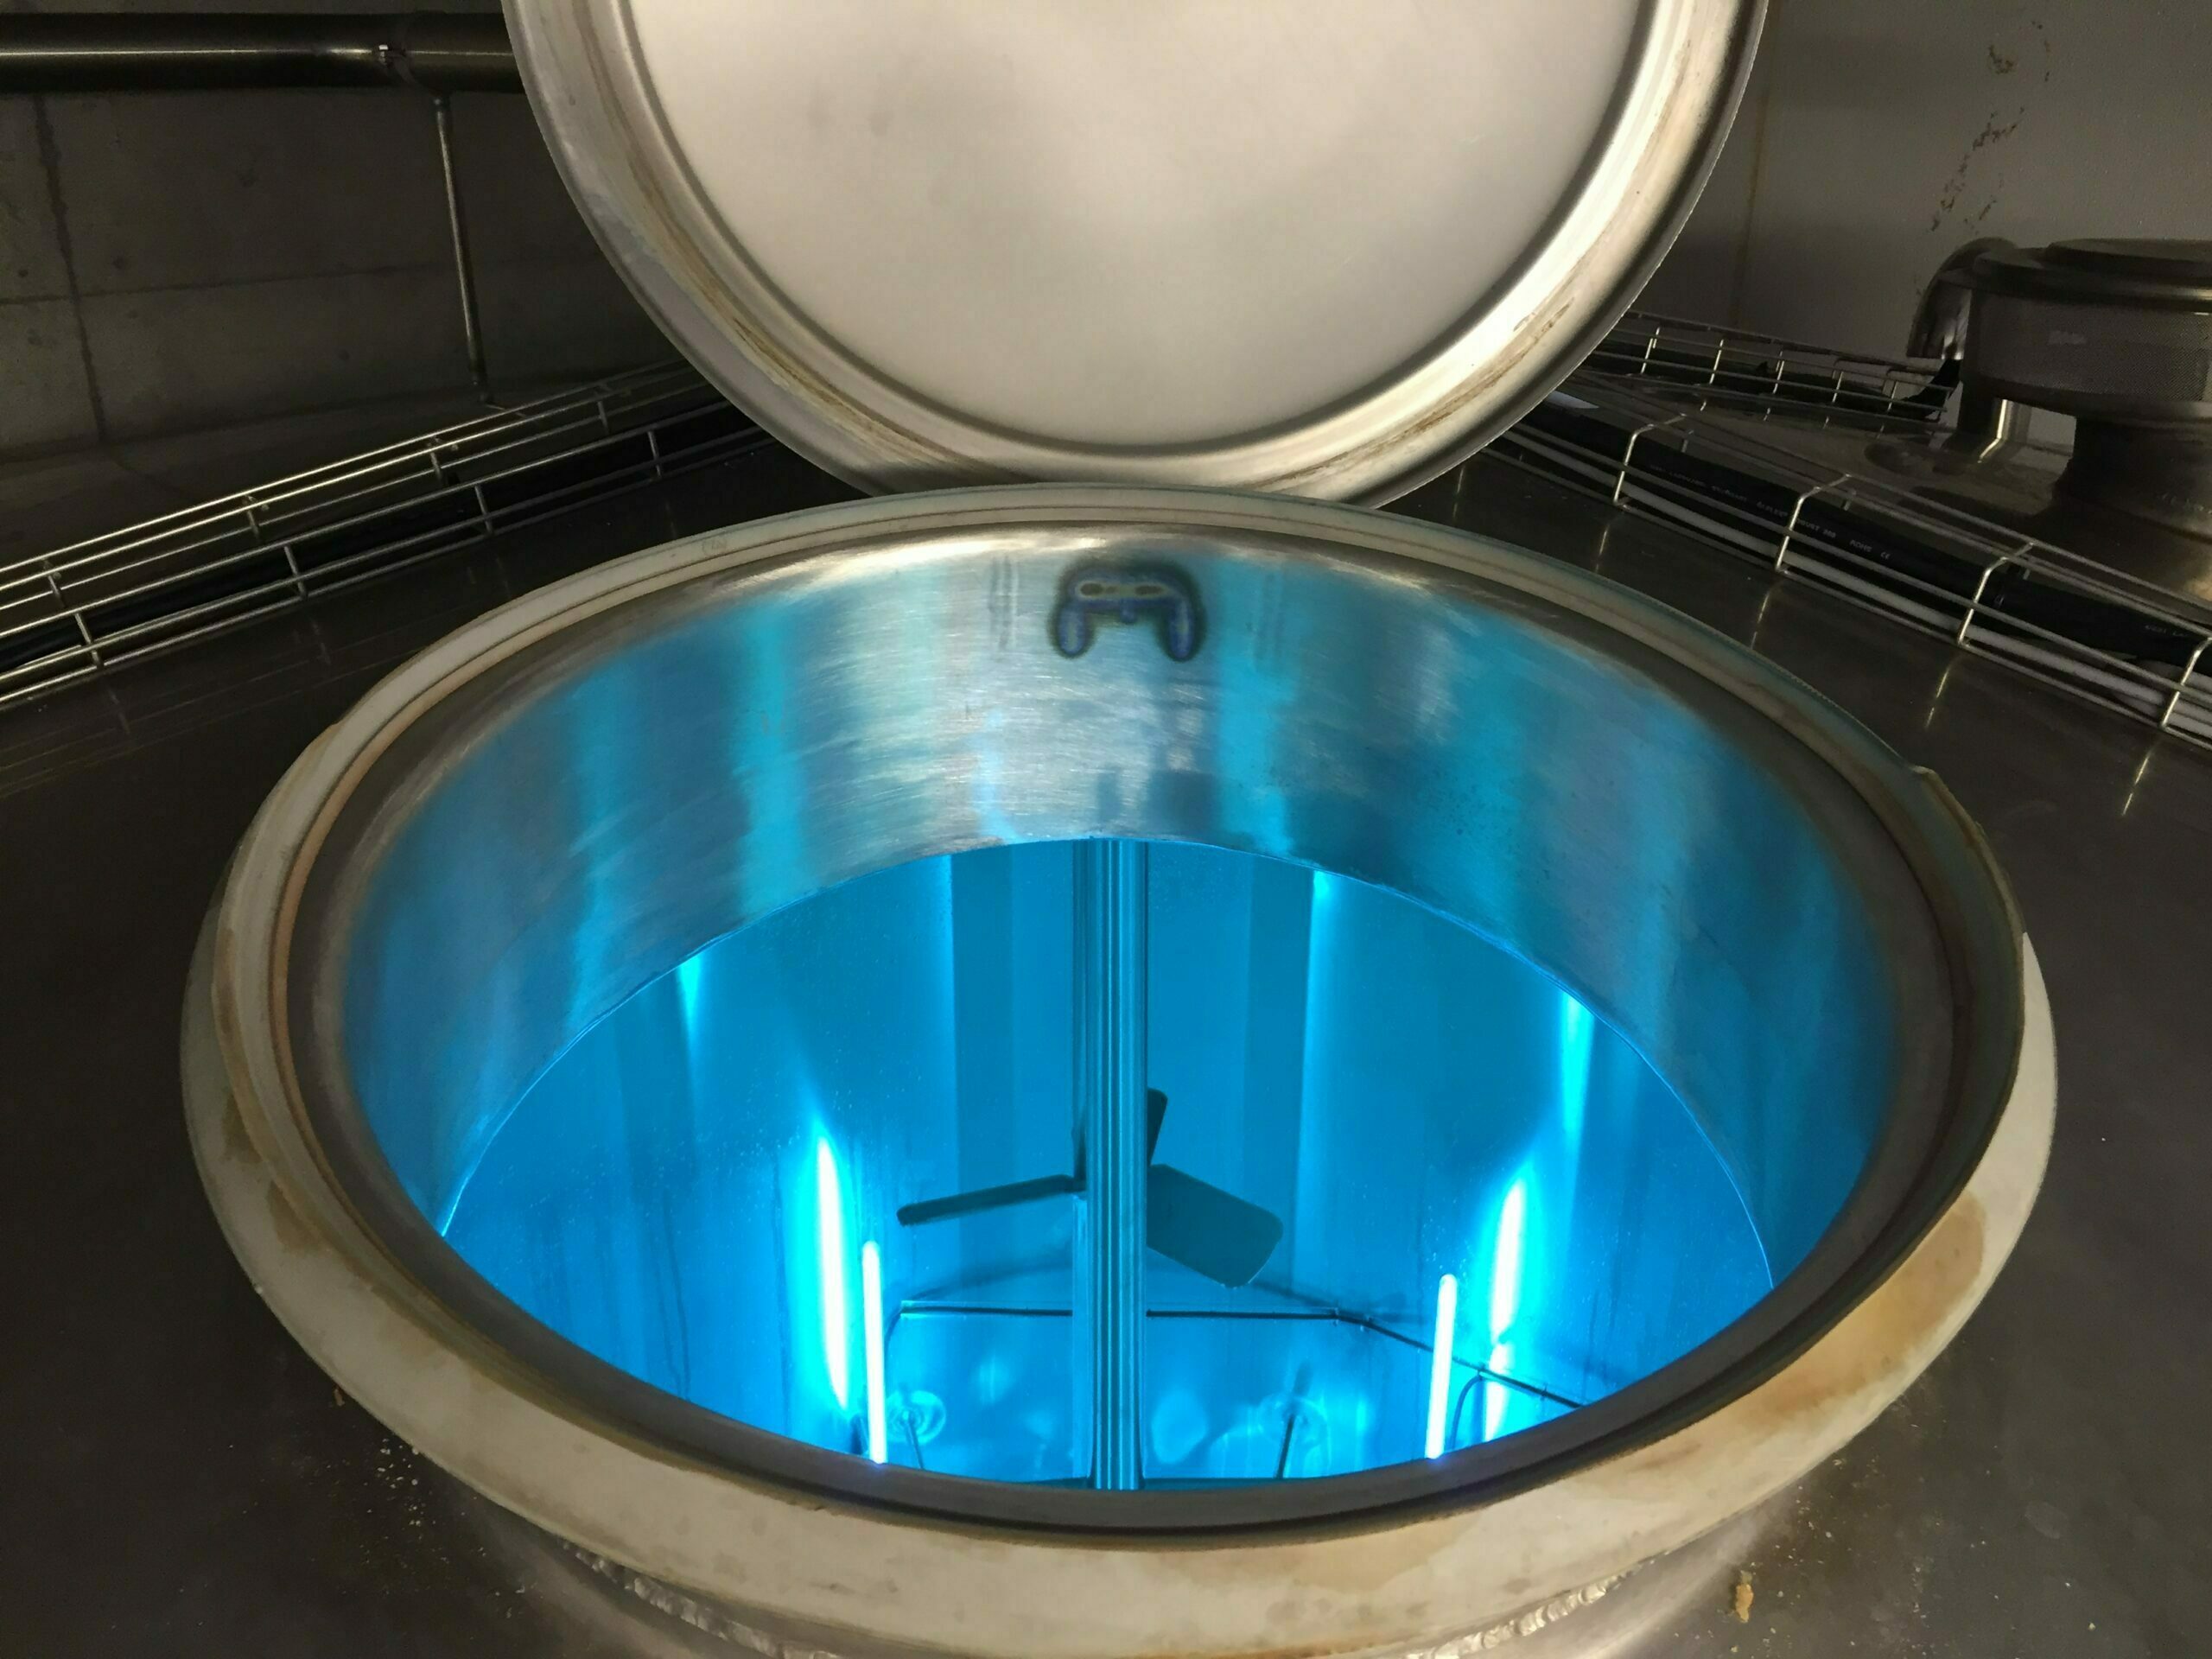 decontamination of water with uvc light dairy